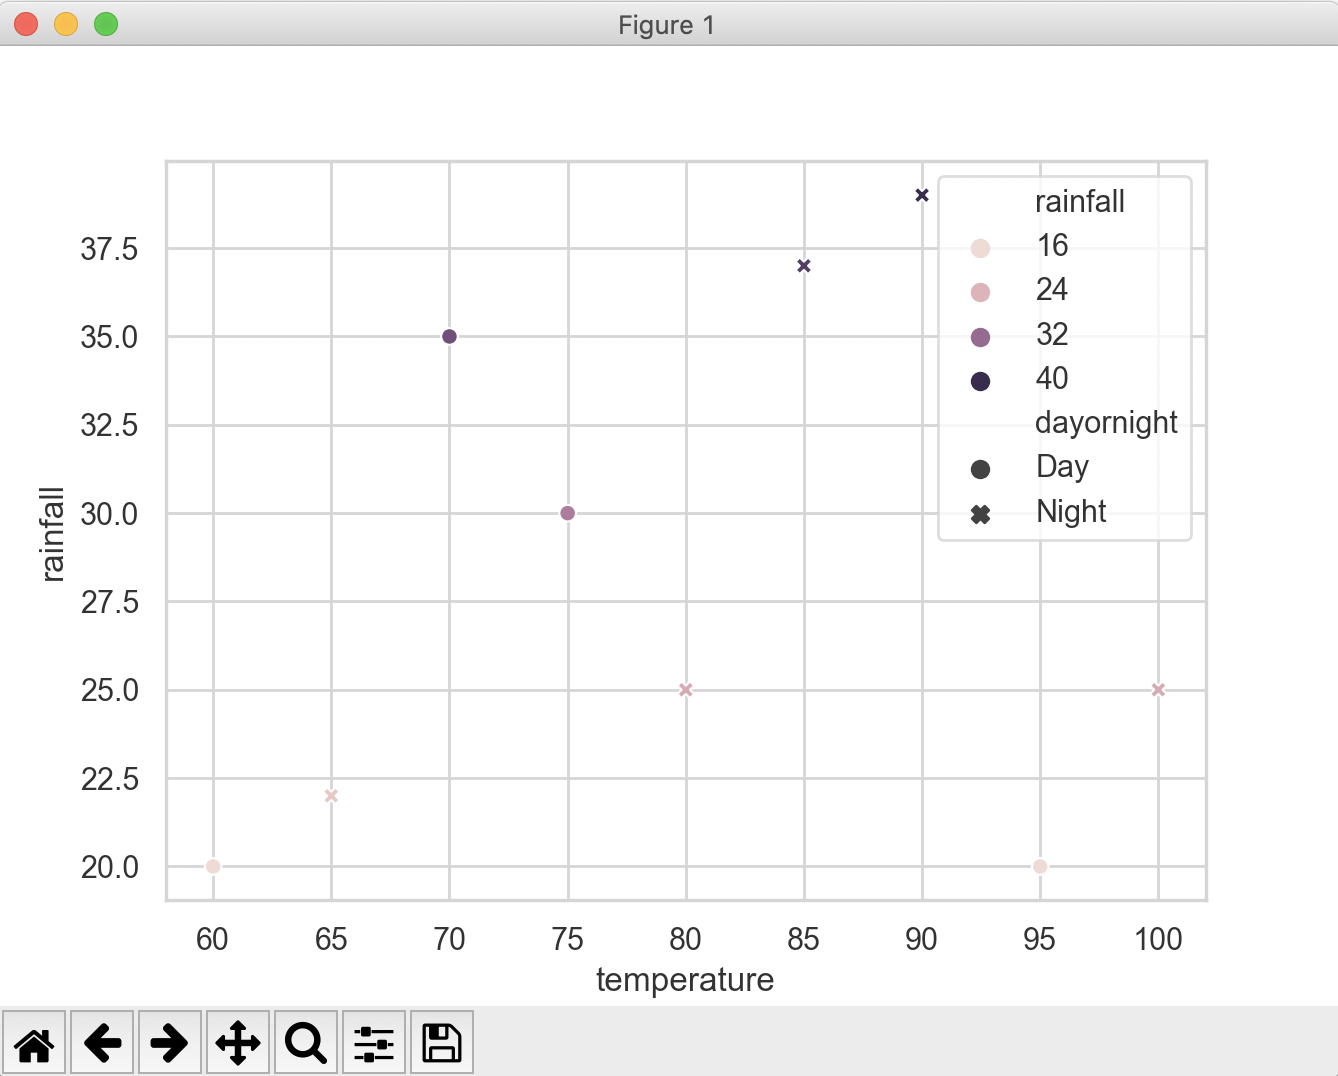 A scatter plot drawn using seaborn using the hue and style parameters